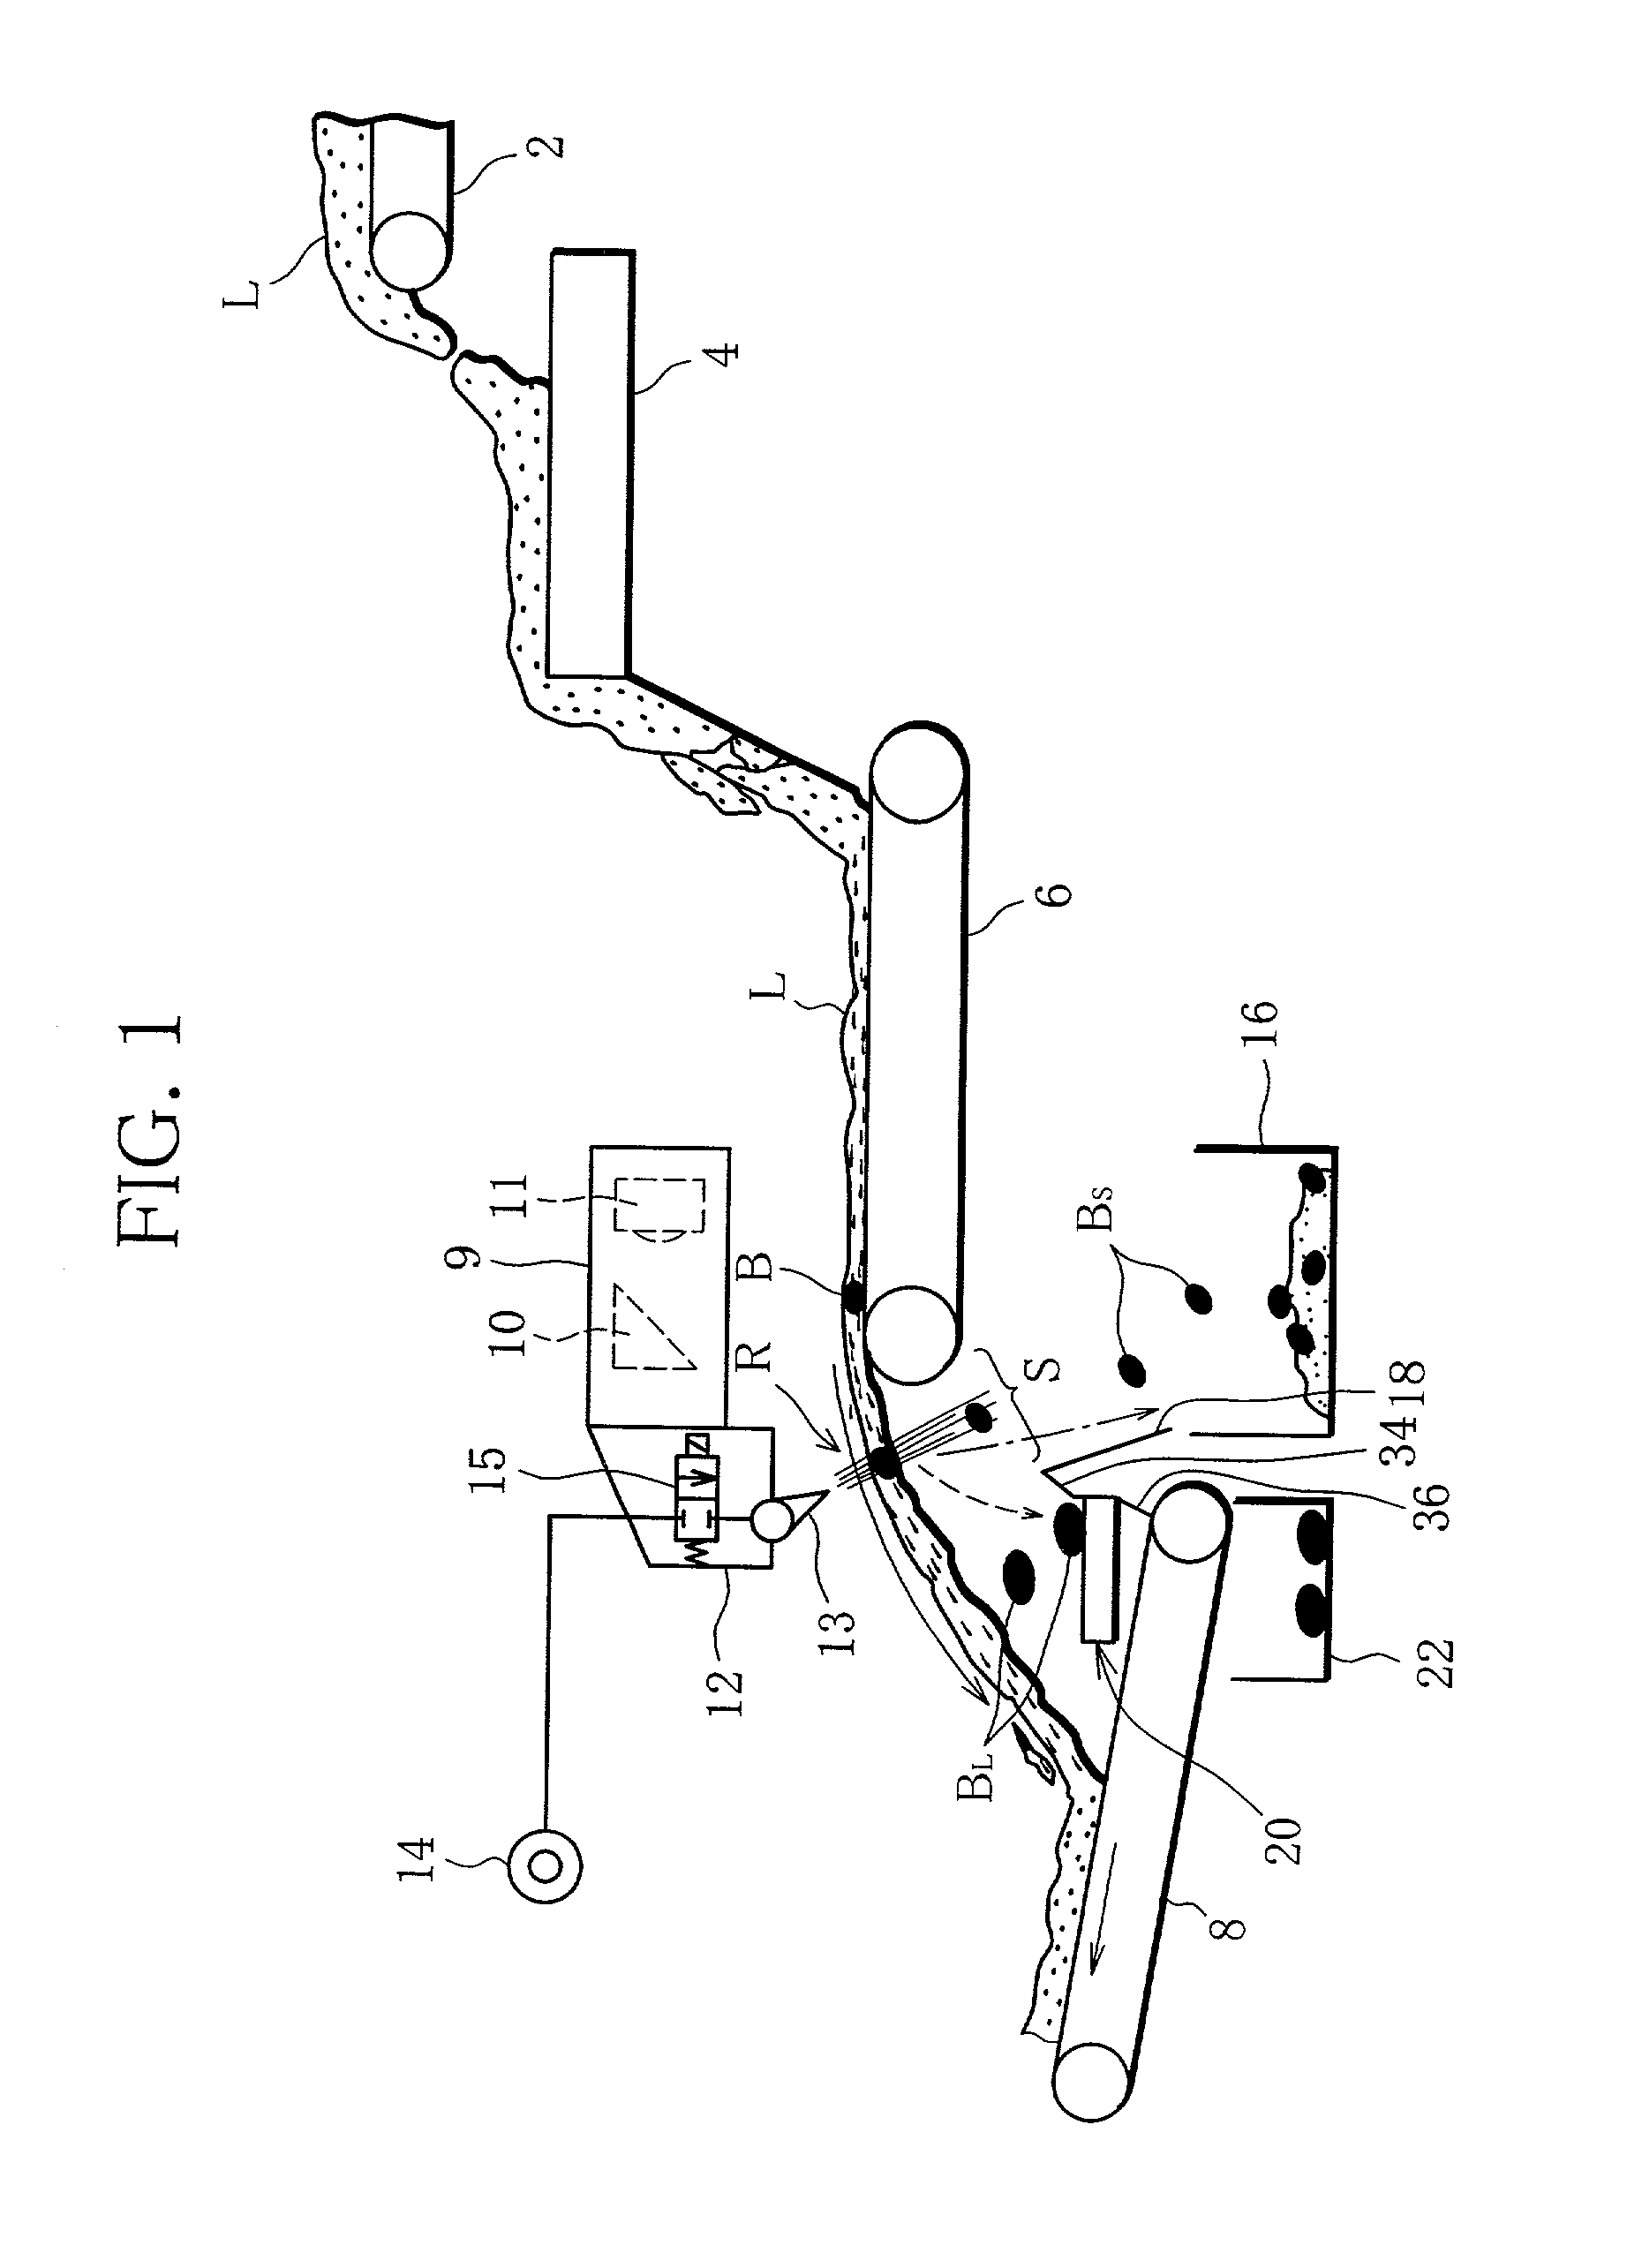 Foreign substance eliminating apparatus